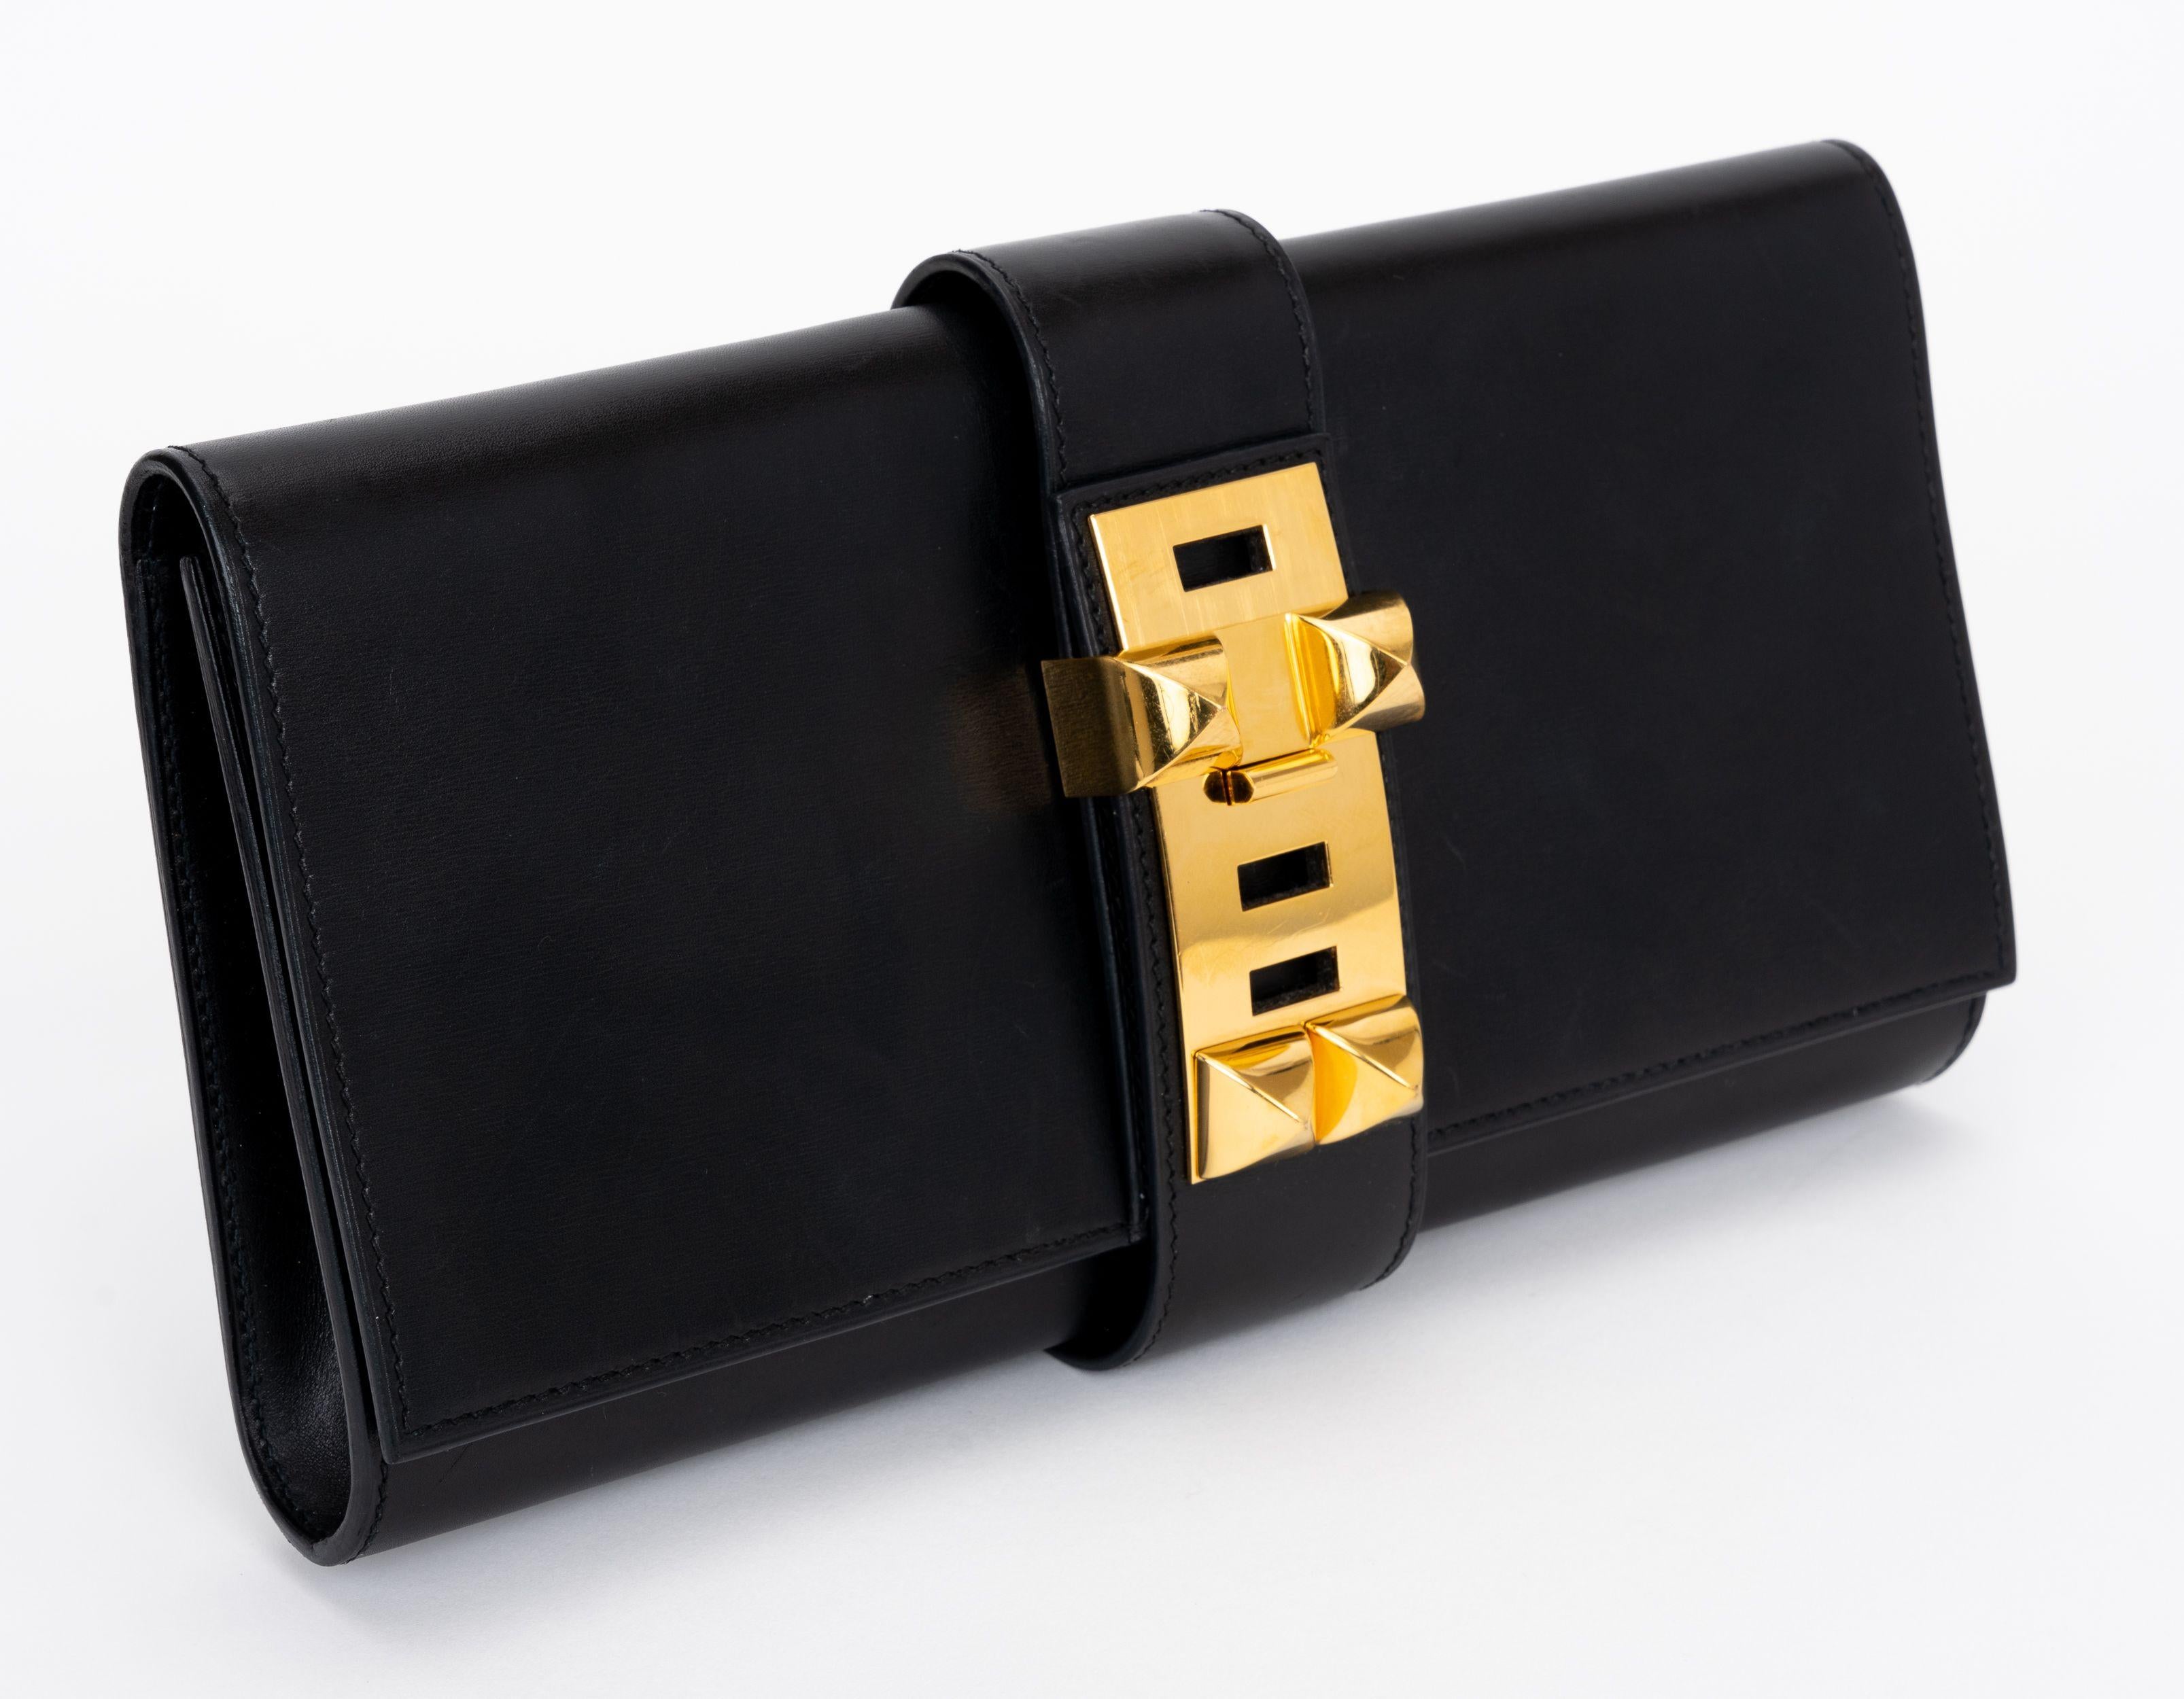 The Hermes Box calf clutch features calfskin leather, a frontal flap and gold-plated studded hardware. One patch pocket in the interior. Date stamp J.original dust cover.